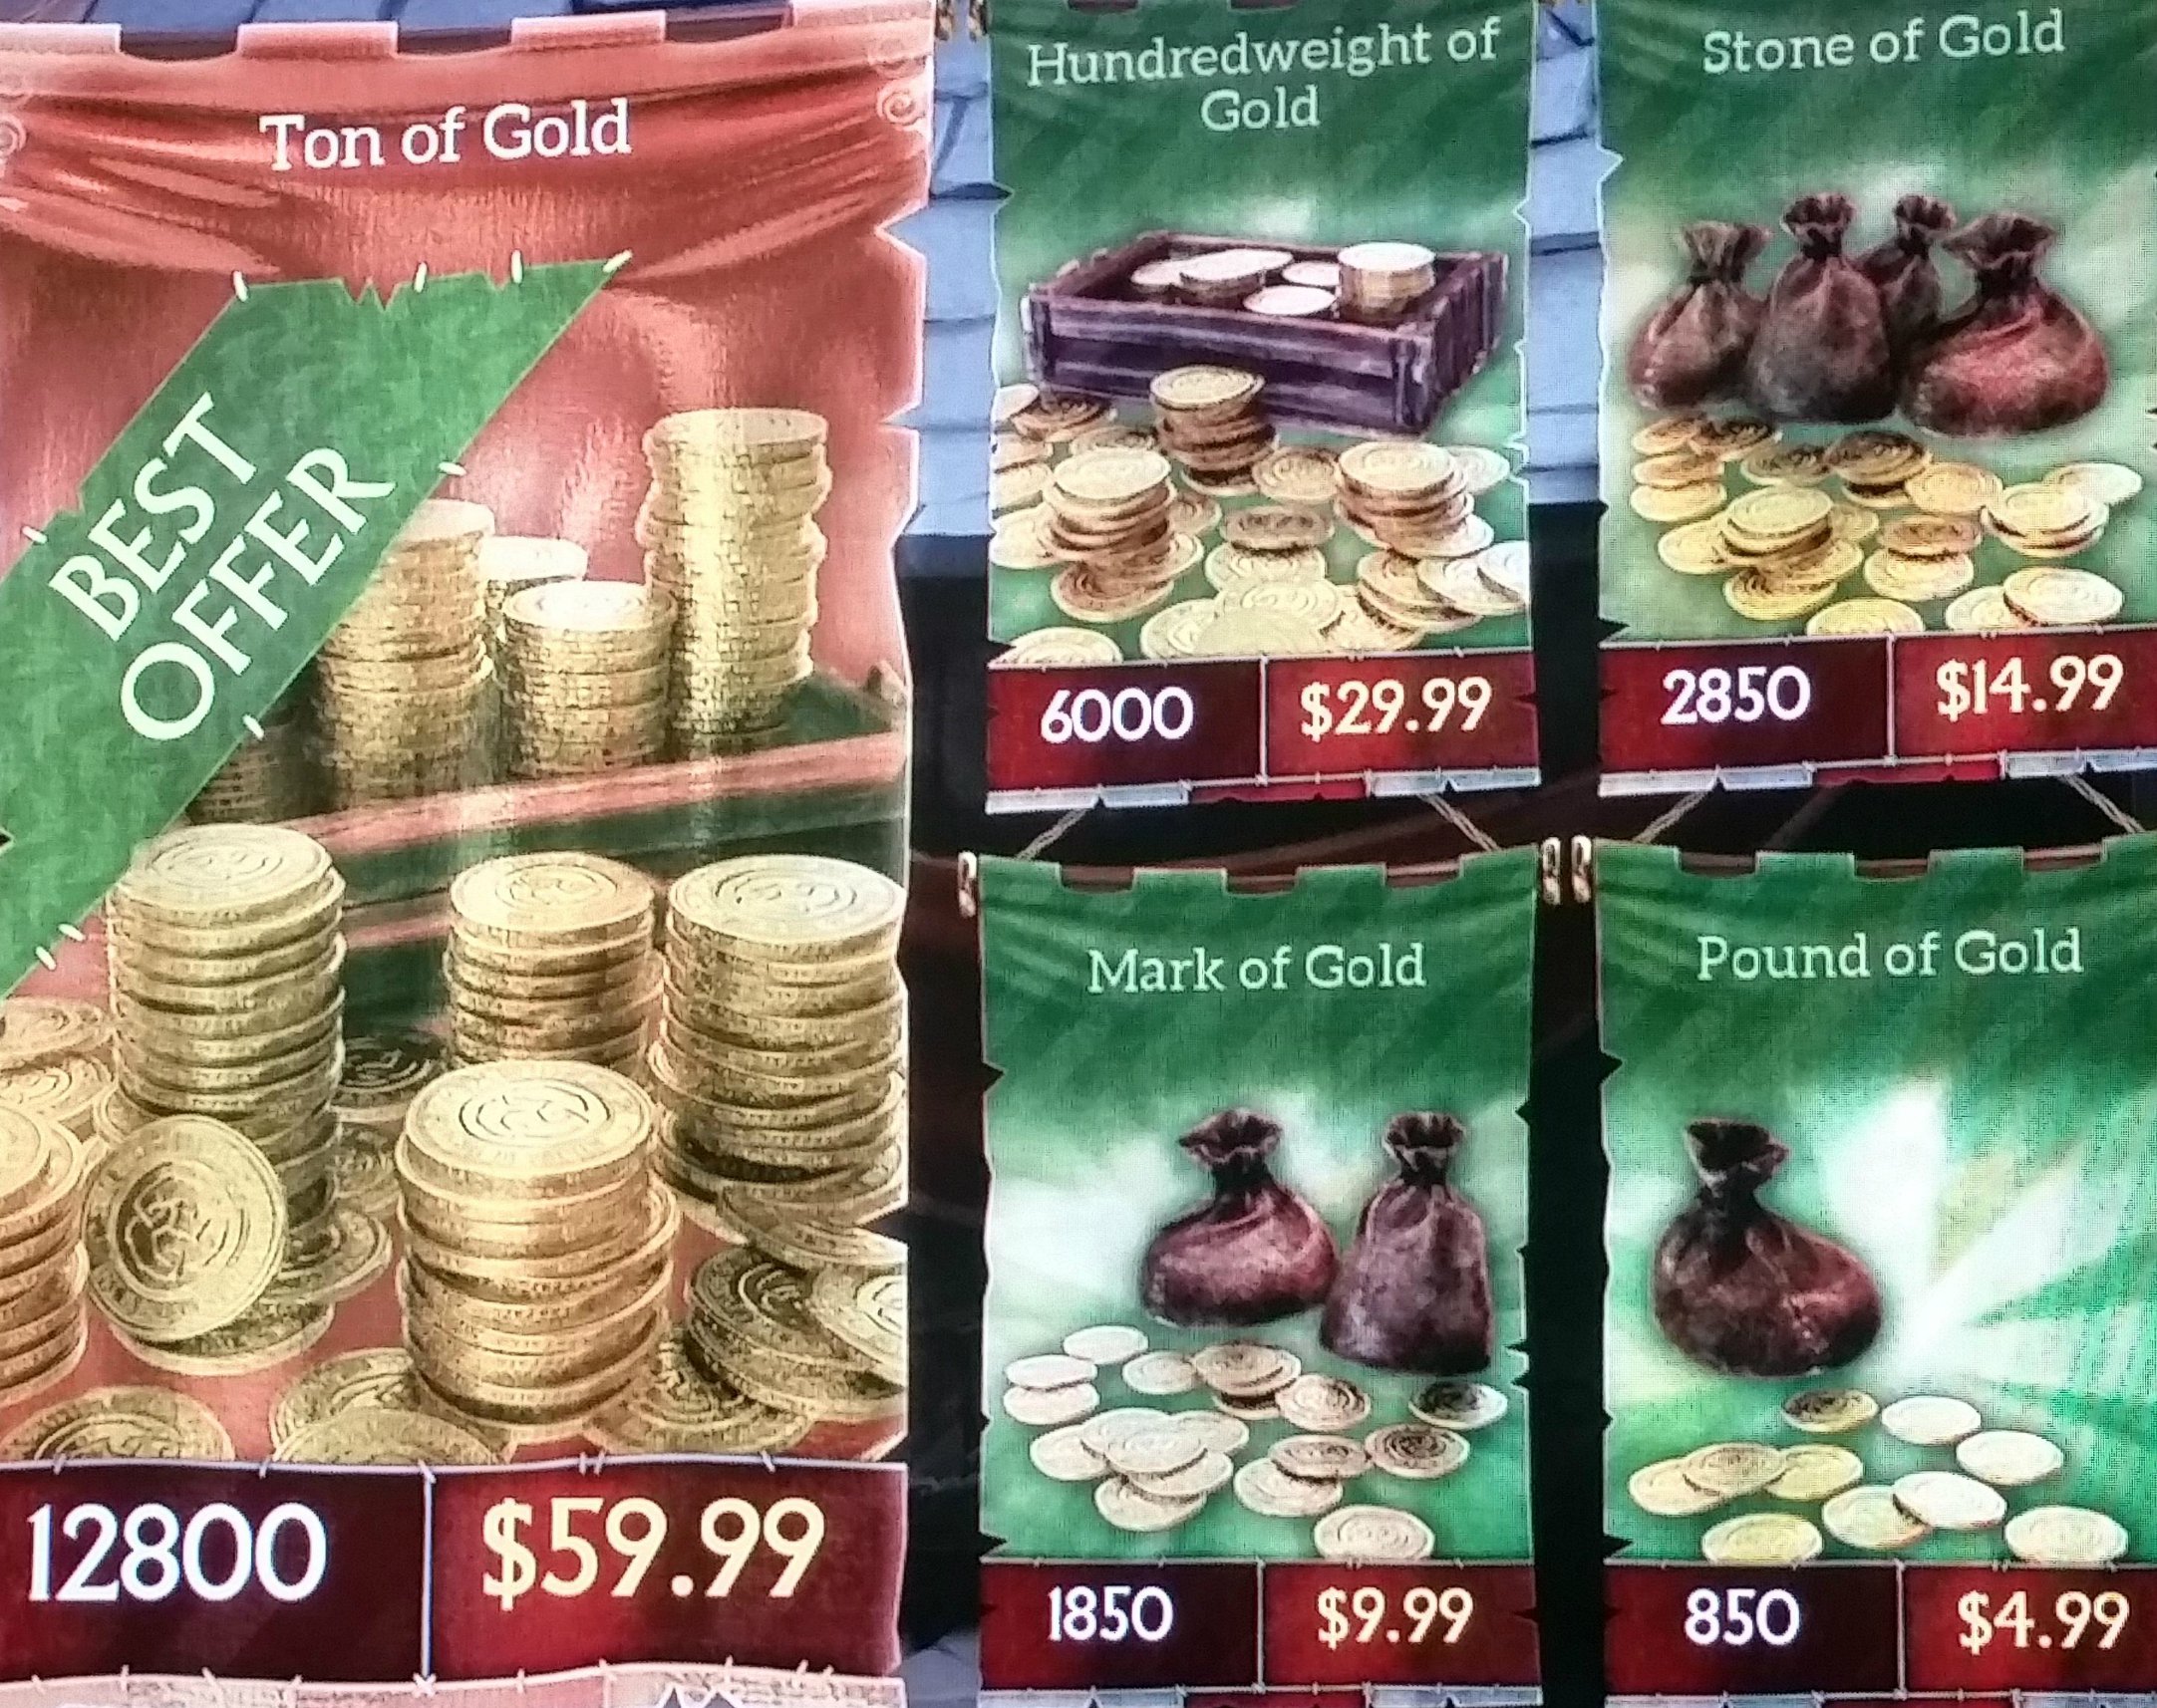 Microtransaction Prices Leaked for “Fable Legends” - They're Not Quite 